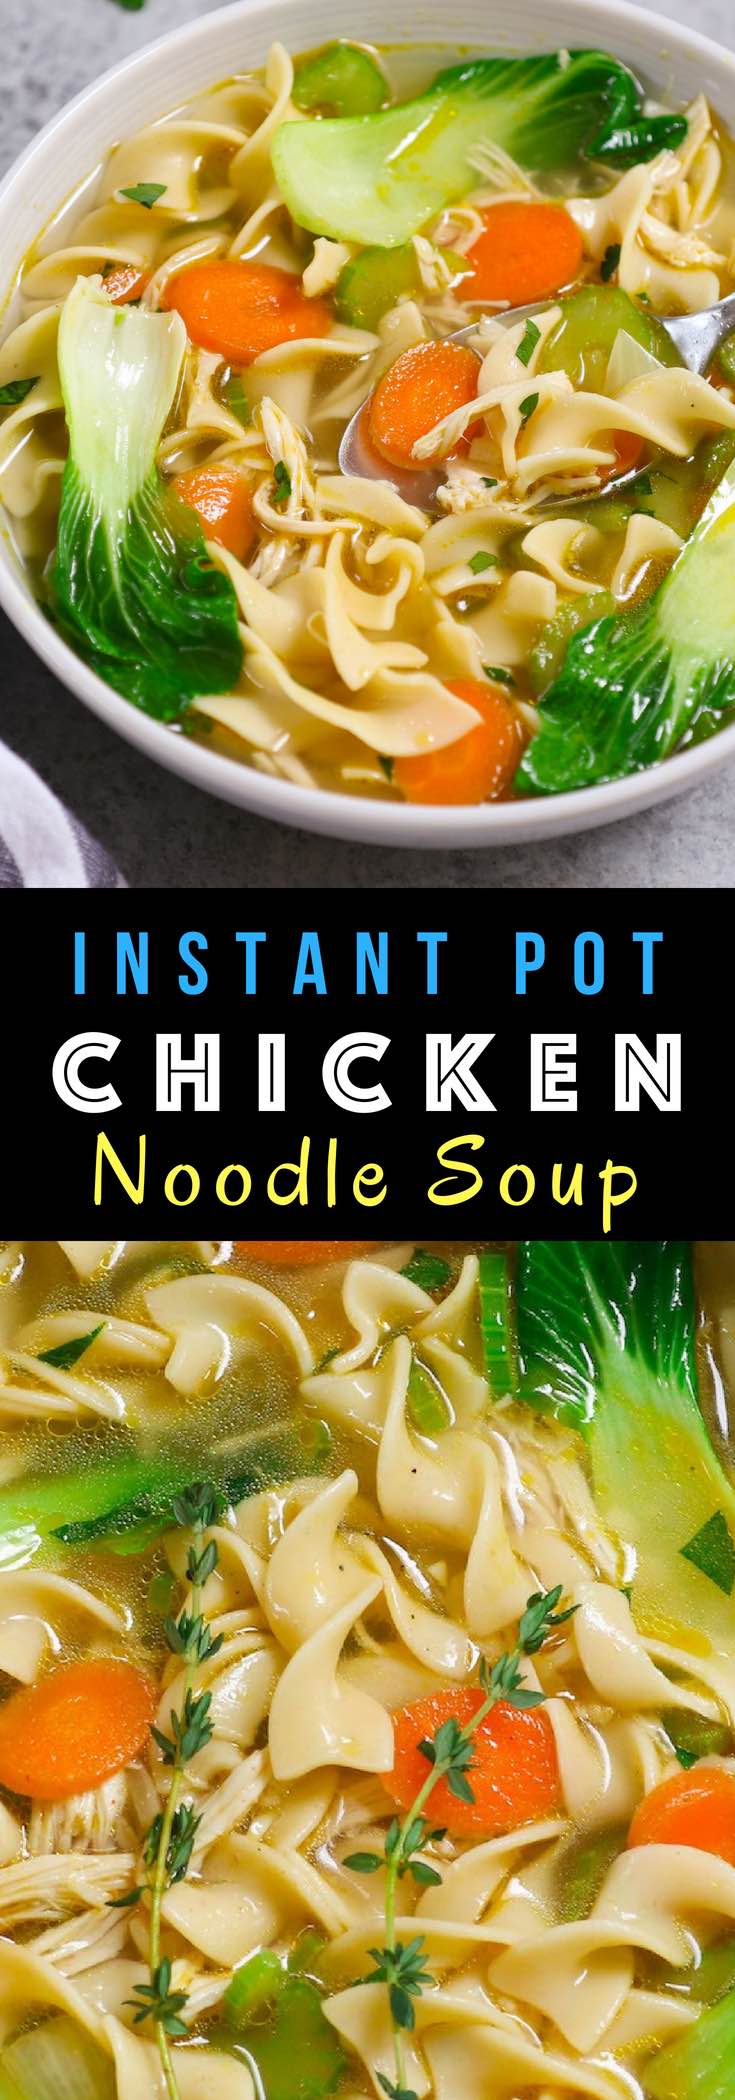 Delicious and comforting Instant Pot Chicken Noodle Soup - loaded with tender chicken, delicious noodles and nutritious vegetables. Best of all, it takes only 30 minutes when made from scratch! #InstantPot #ChickenNoodleSoup